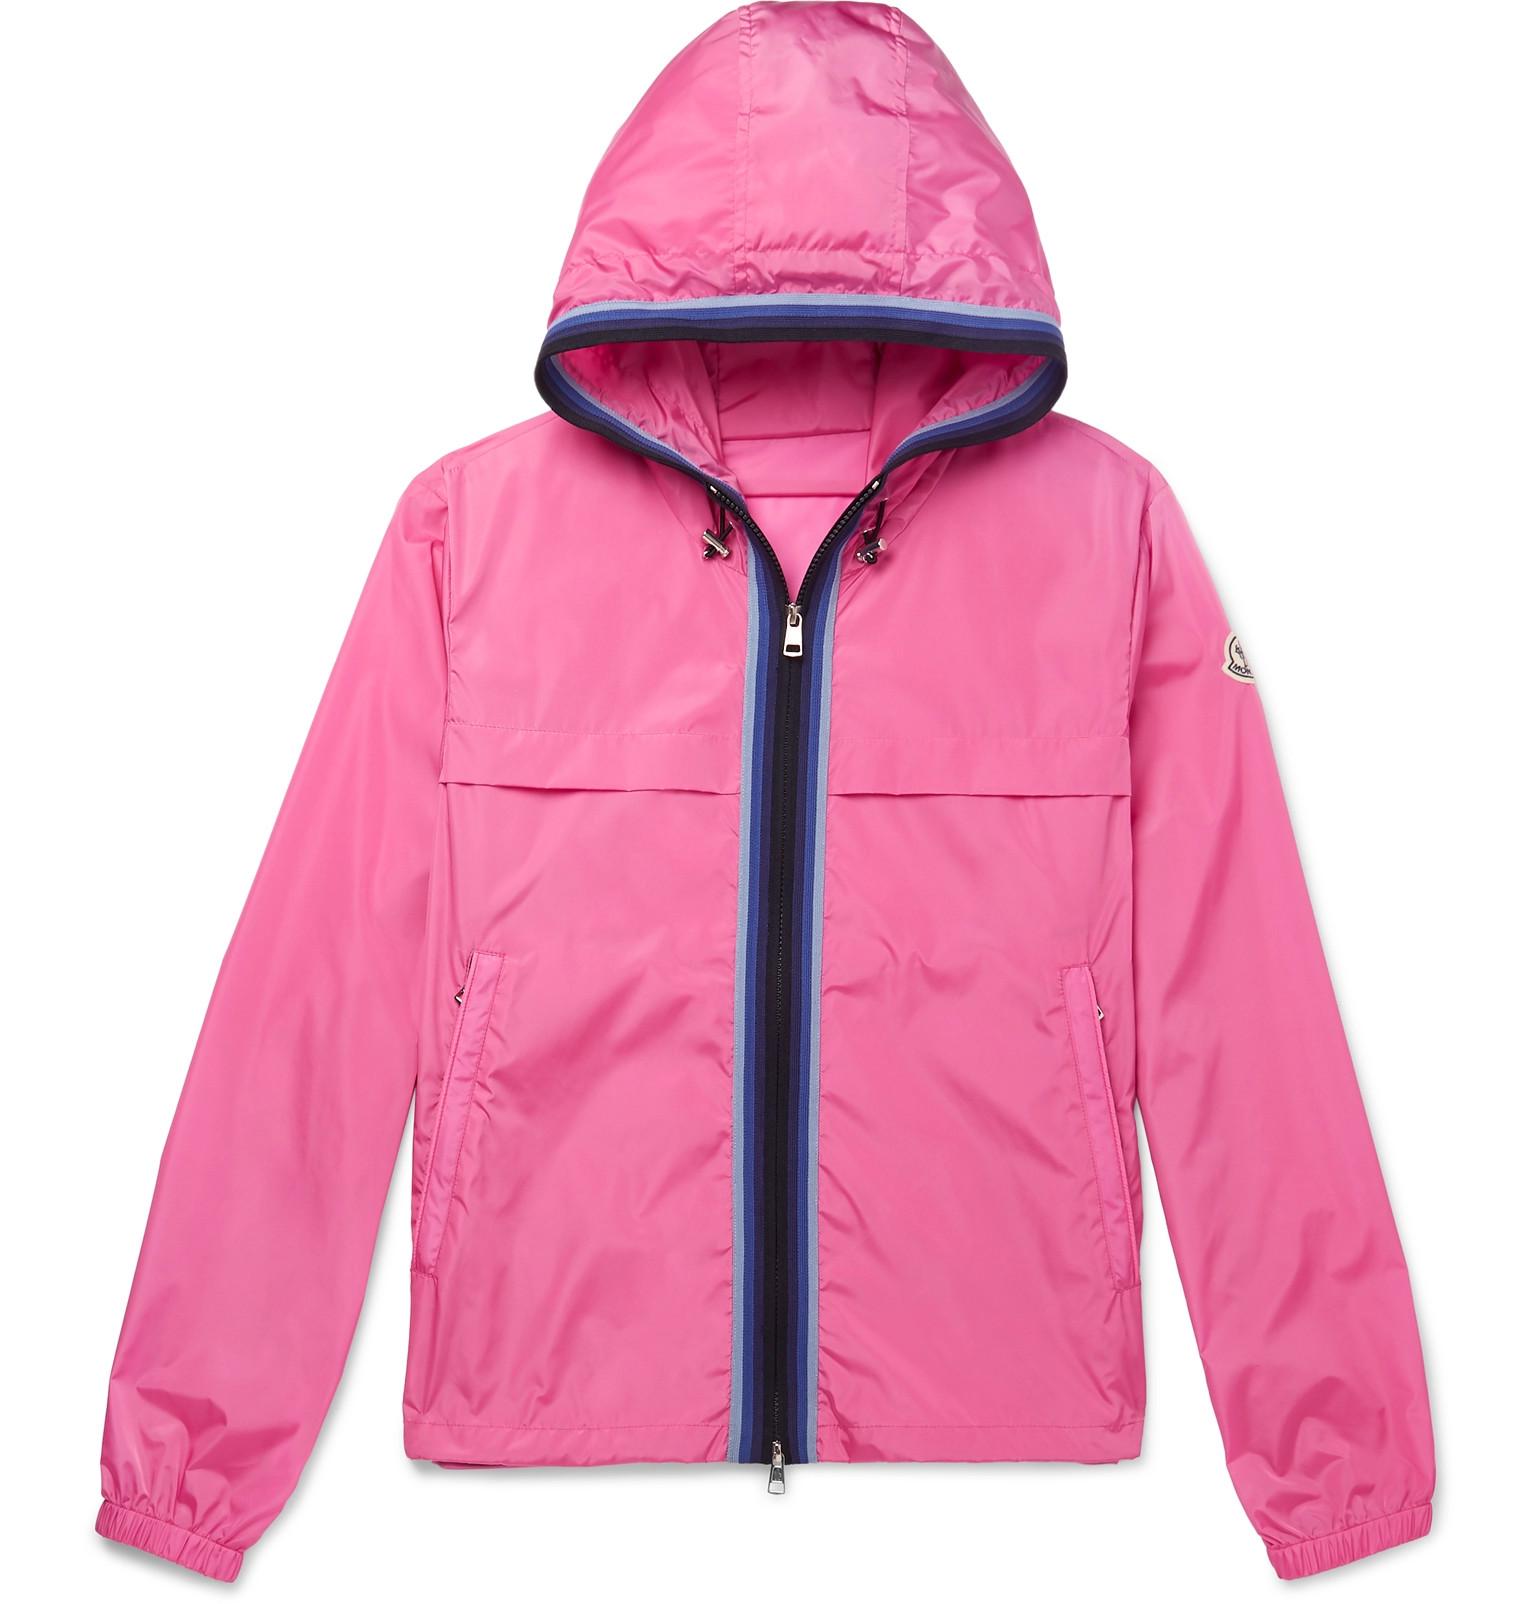 Moncler Anton Shell Hooded Jacket in Pink for Men - Lyst